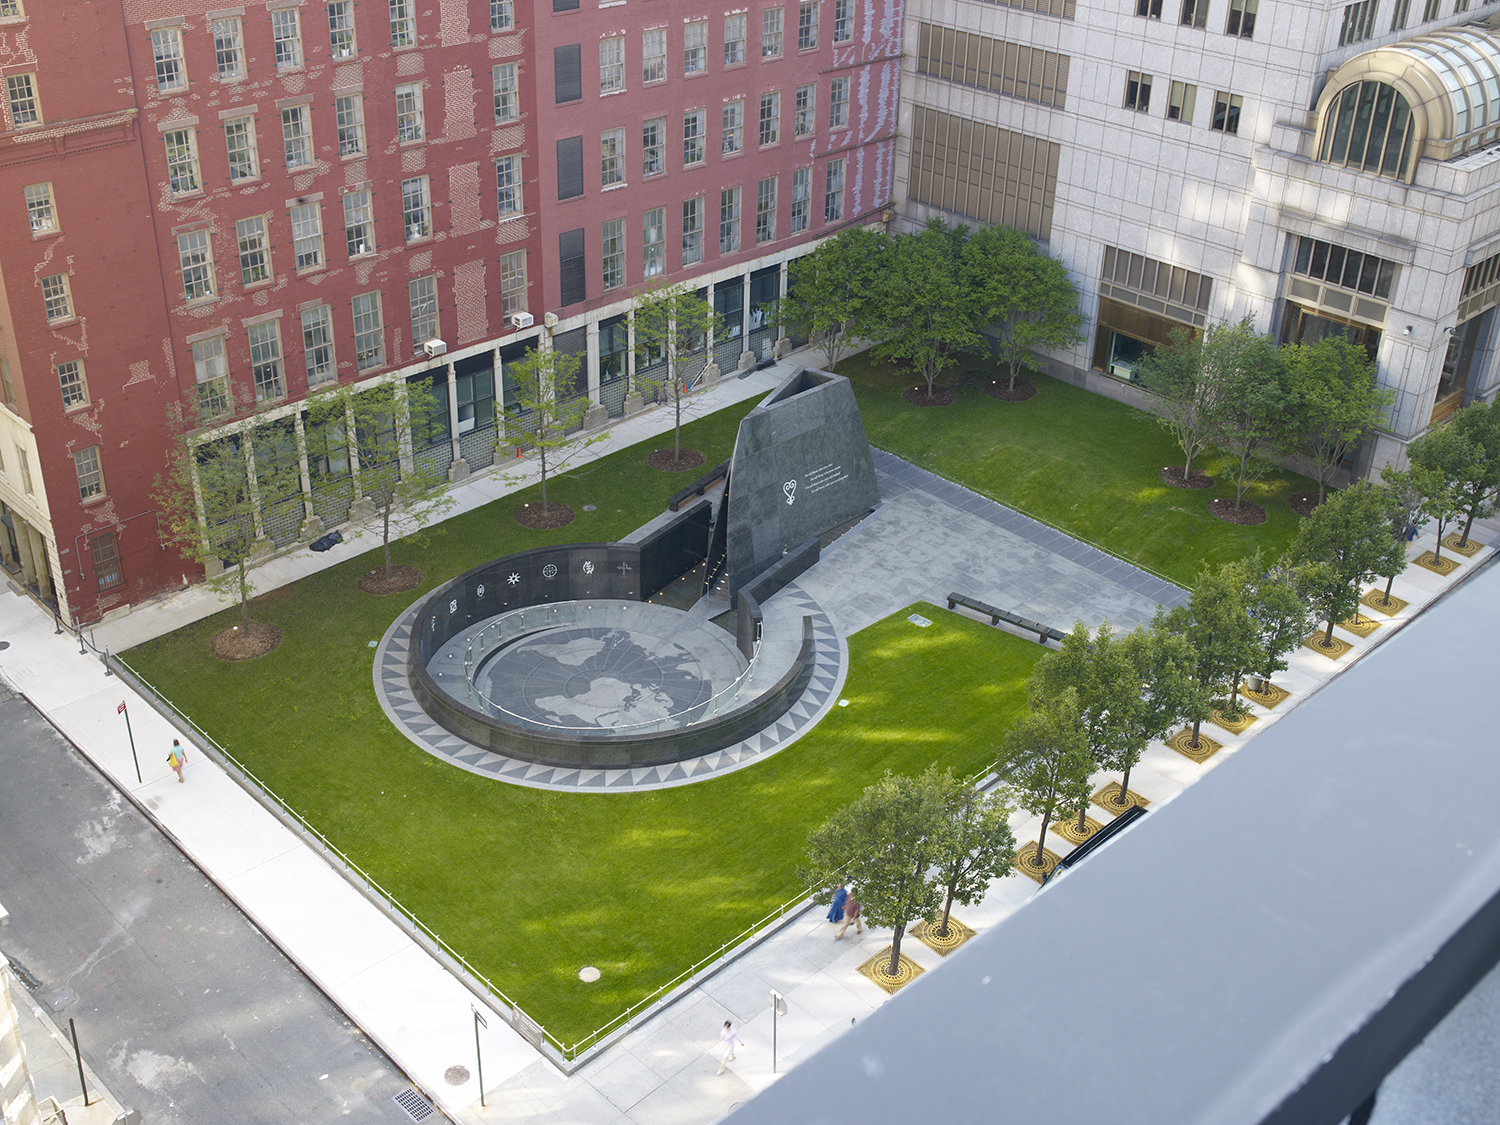 Photograph of African Burial Ground National Monument in New York City by Carol M. Highsmith. Stone monument surrounded by a lawn and tall city buildings.